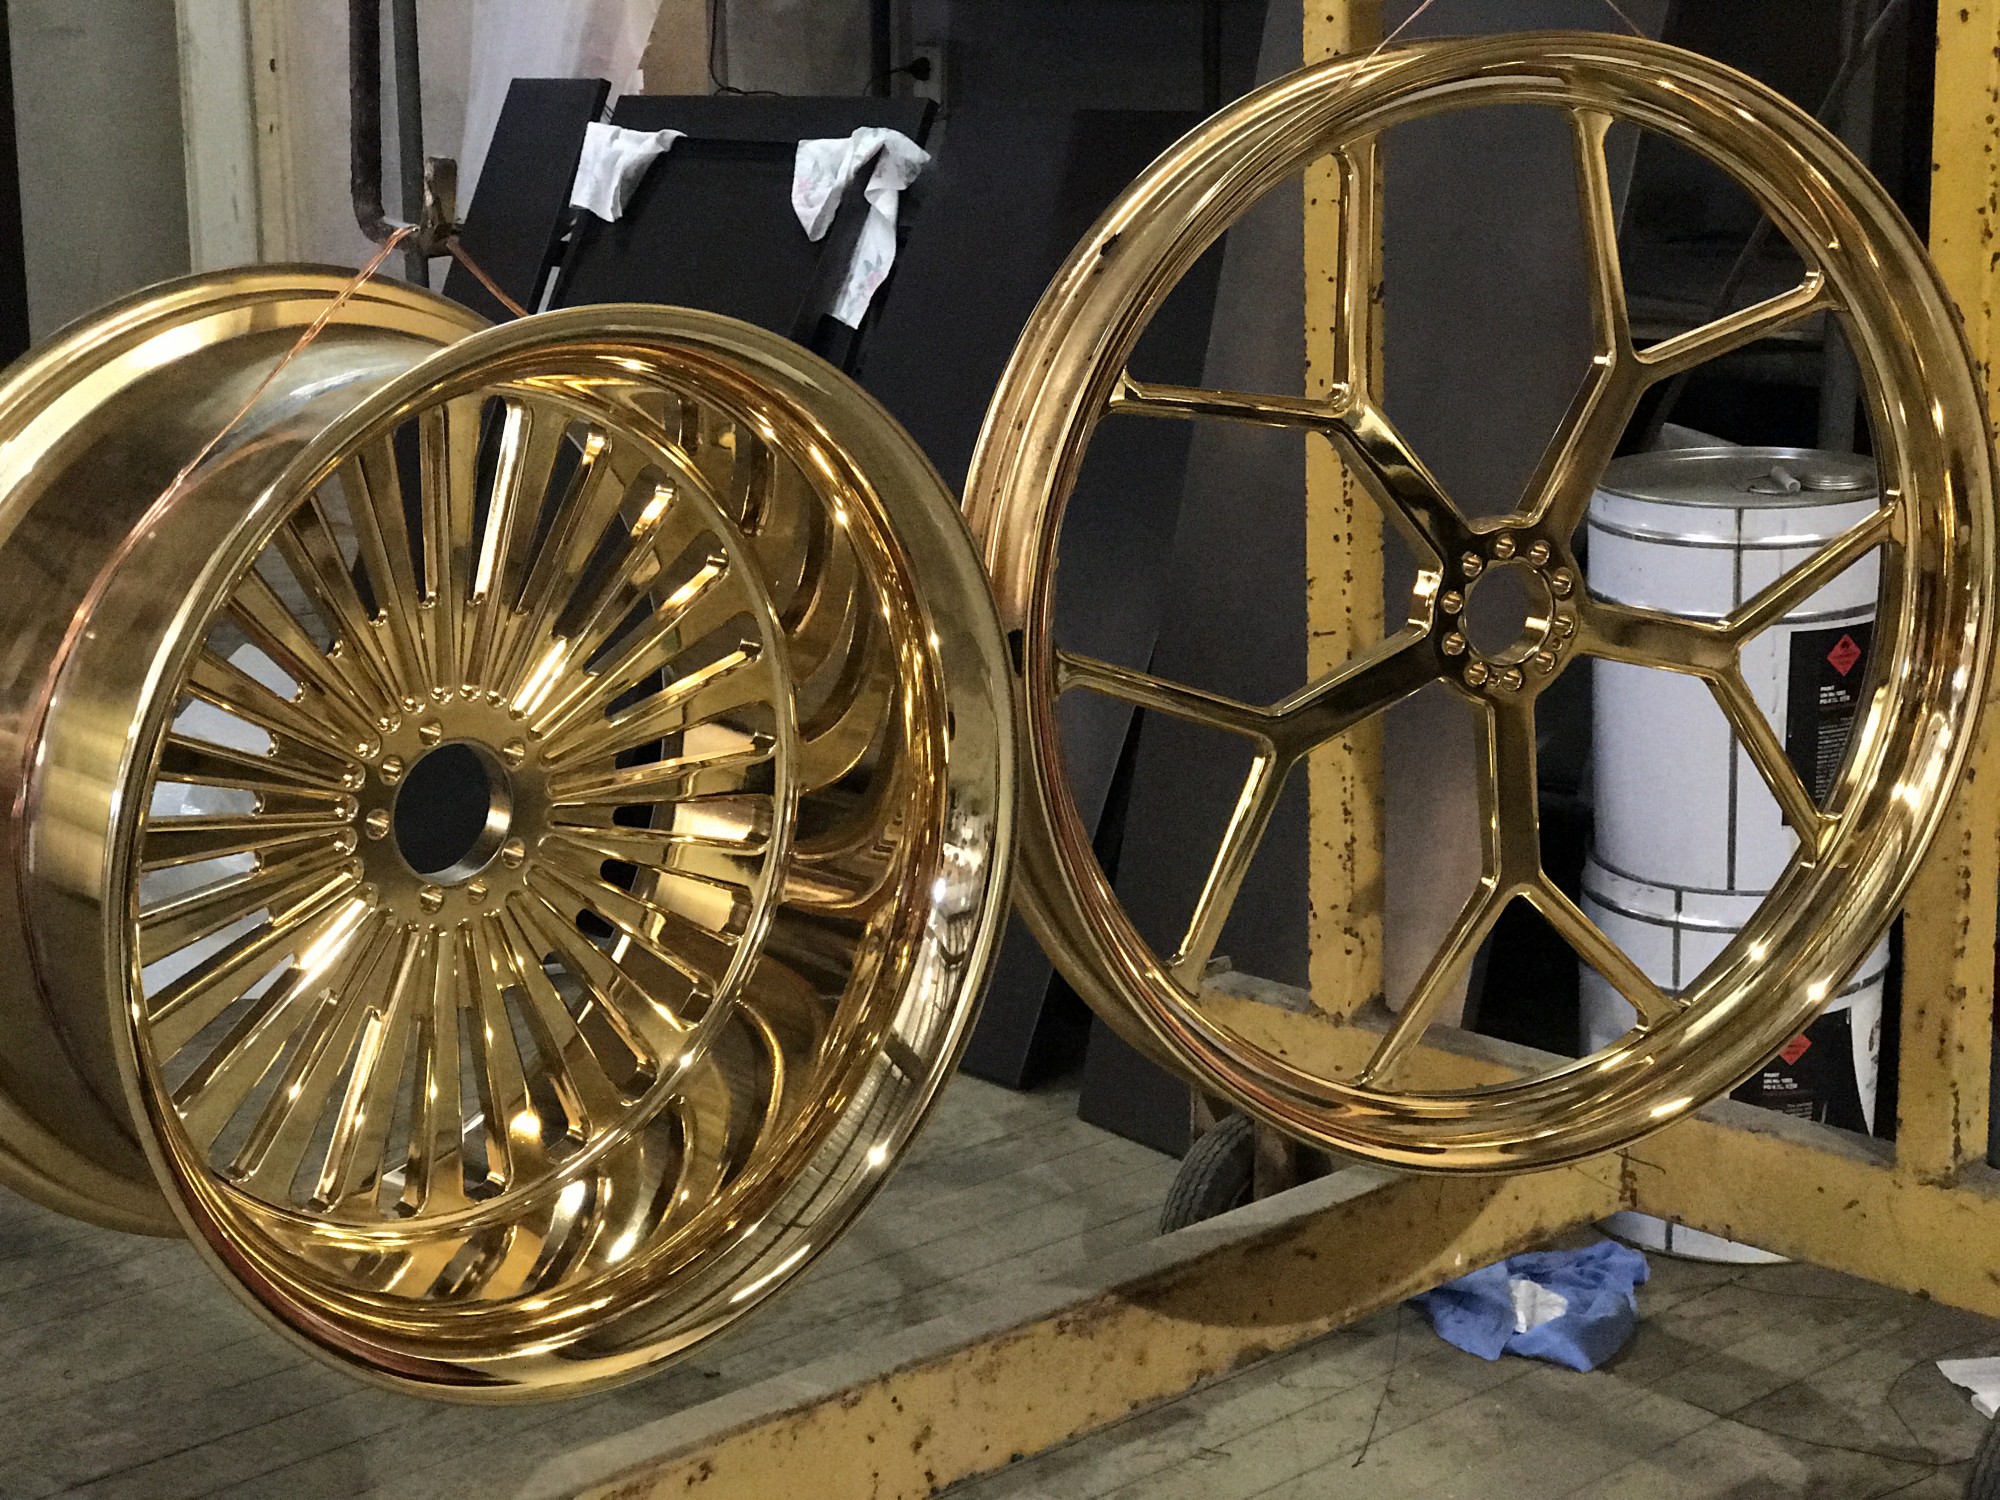 Gold-plated Harley Davidson front & rear wheels